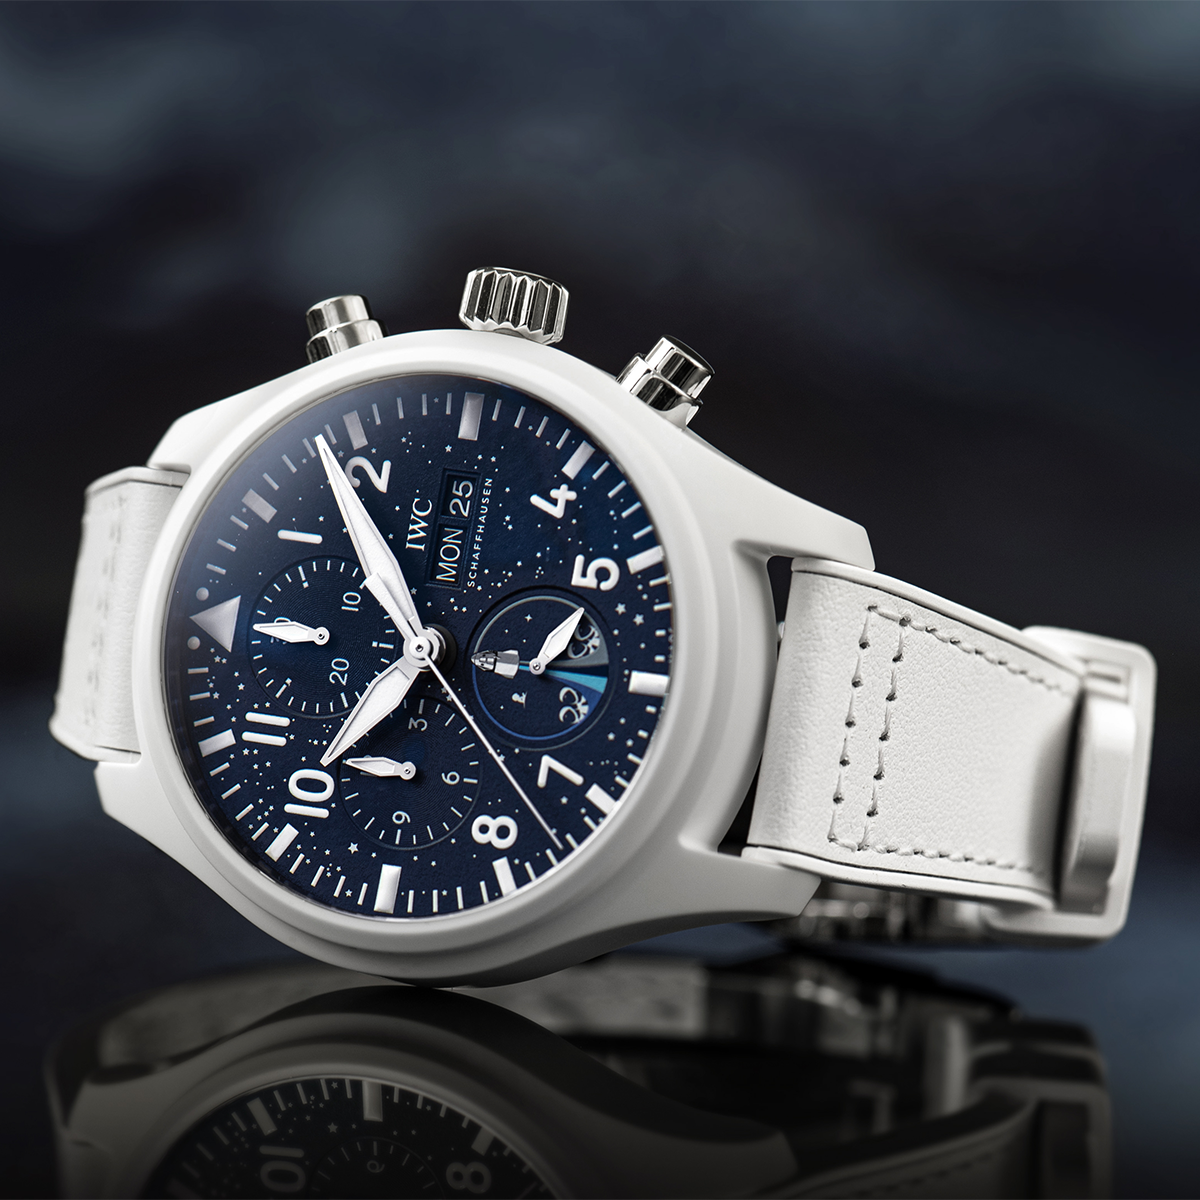 IWC Schaffhausen Supports The Inspiration4 Mission